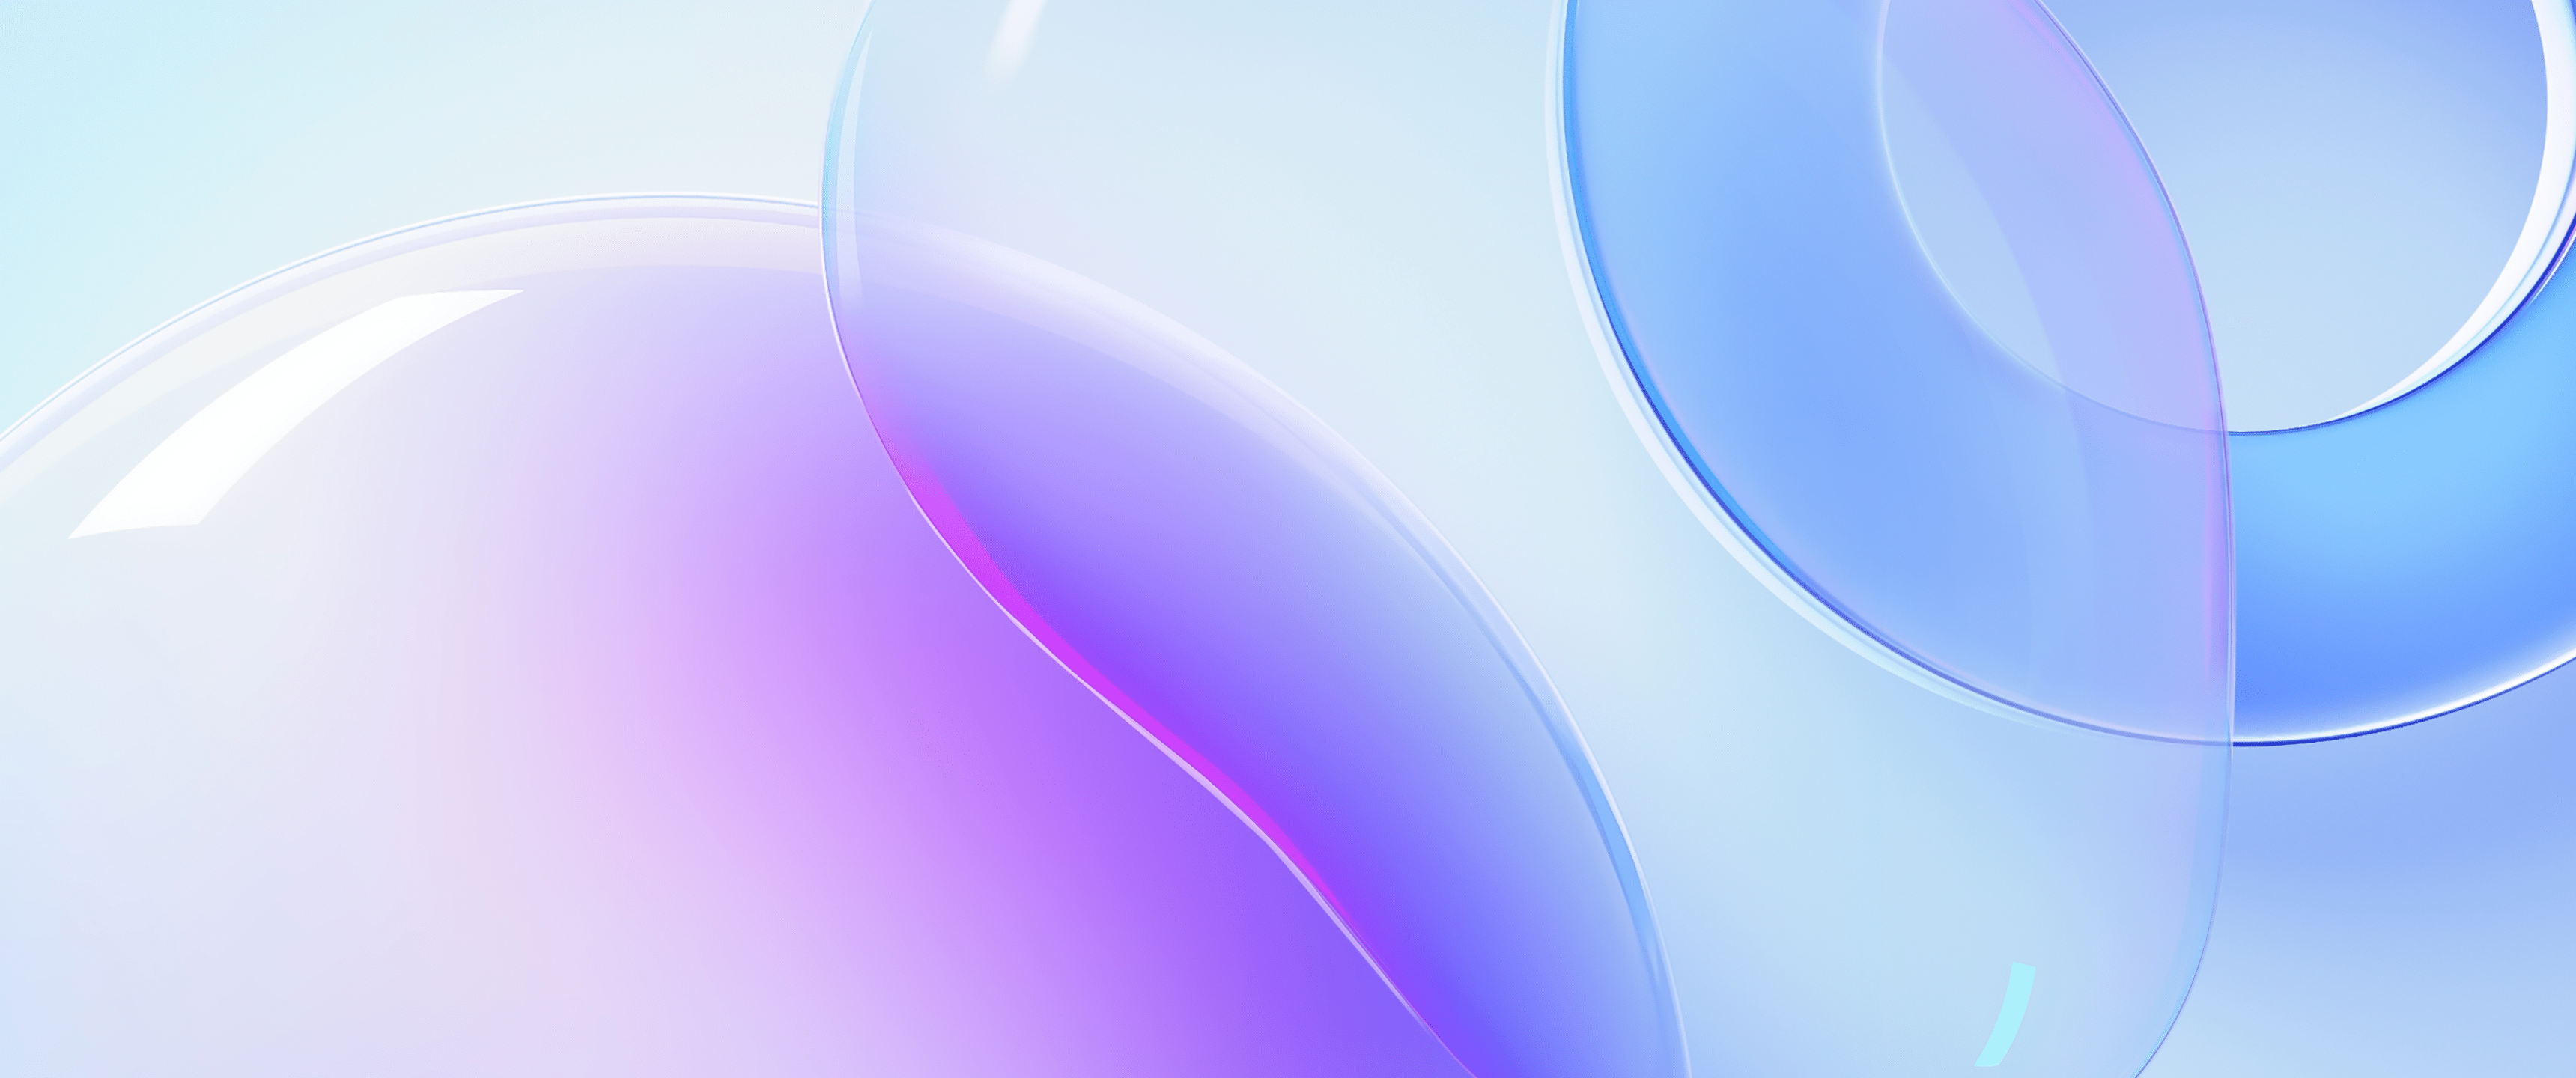 A blue and purple abstract image with two semi-circular glass objects. - Bubbles